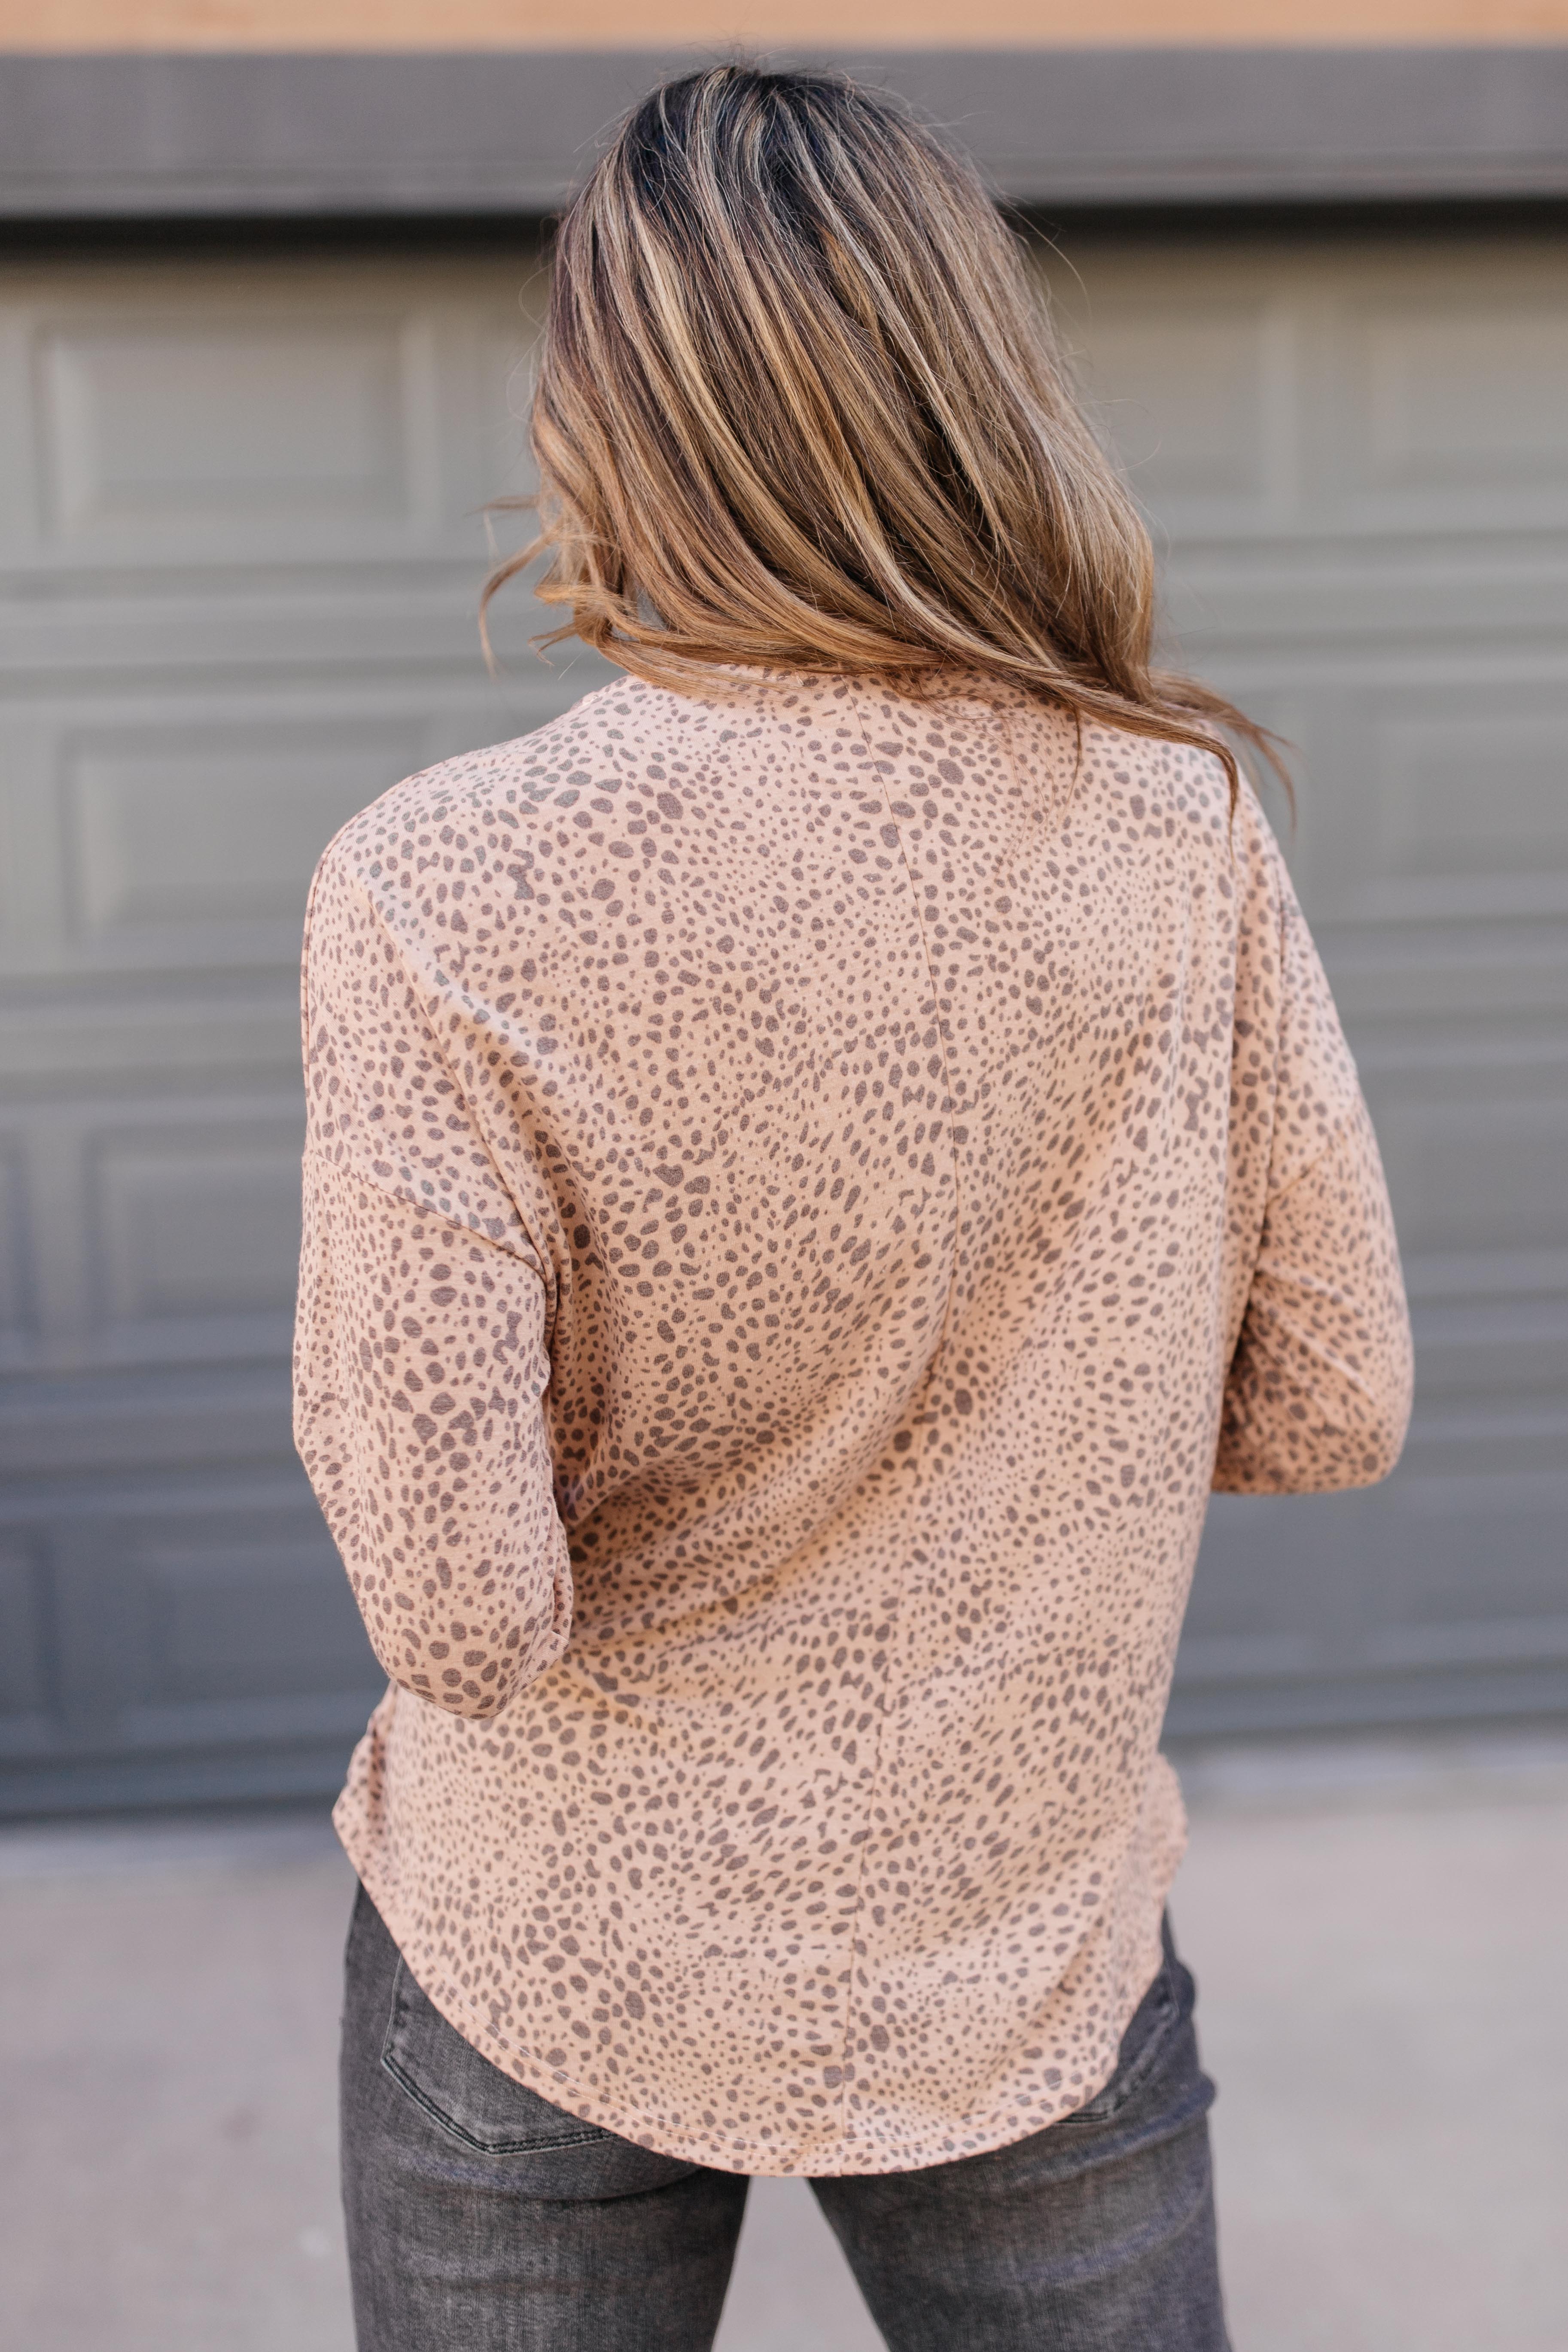 Wrapped With Spots Top in Taupe